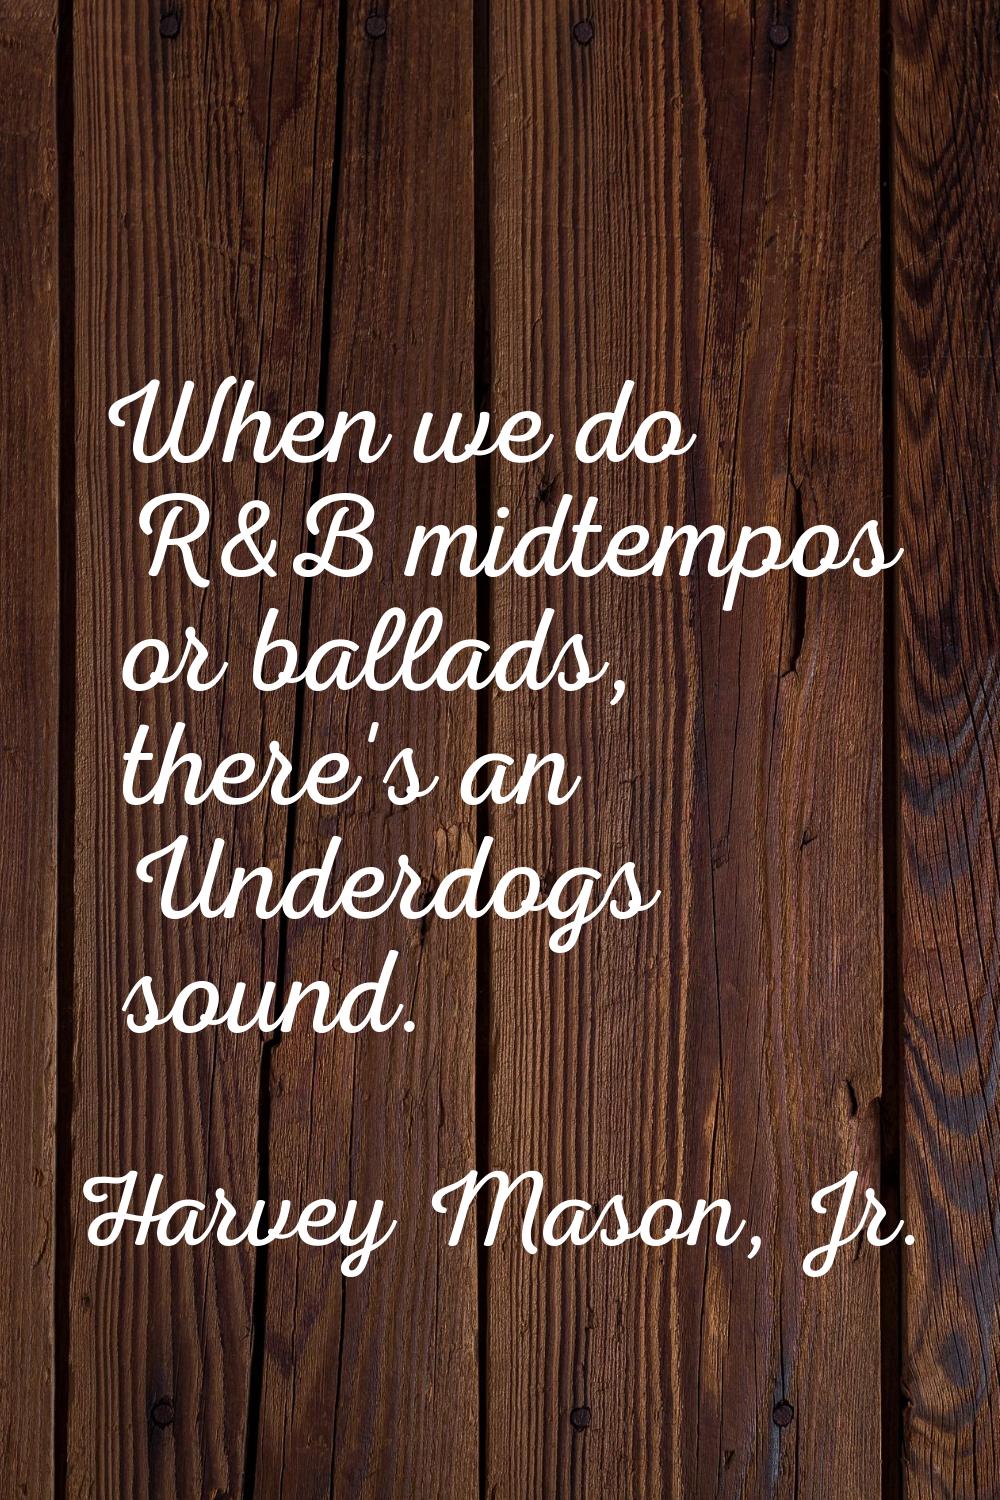 When we do R&B midtempos or ballads, there's an Underdogs sound.